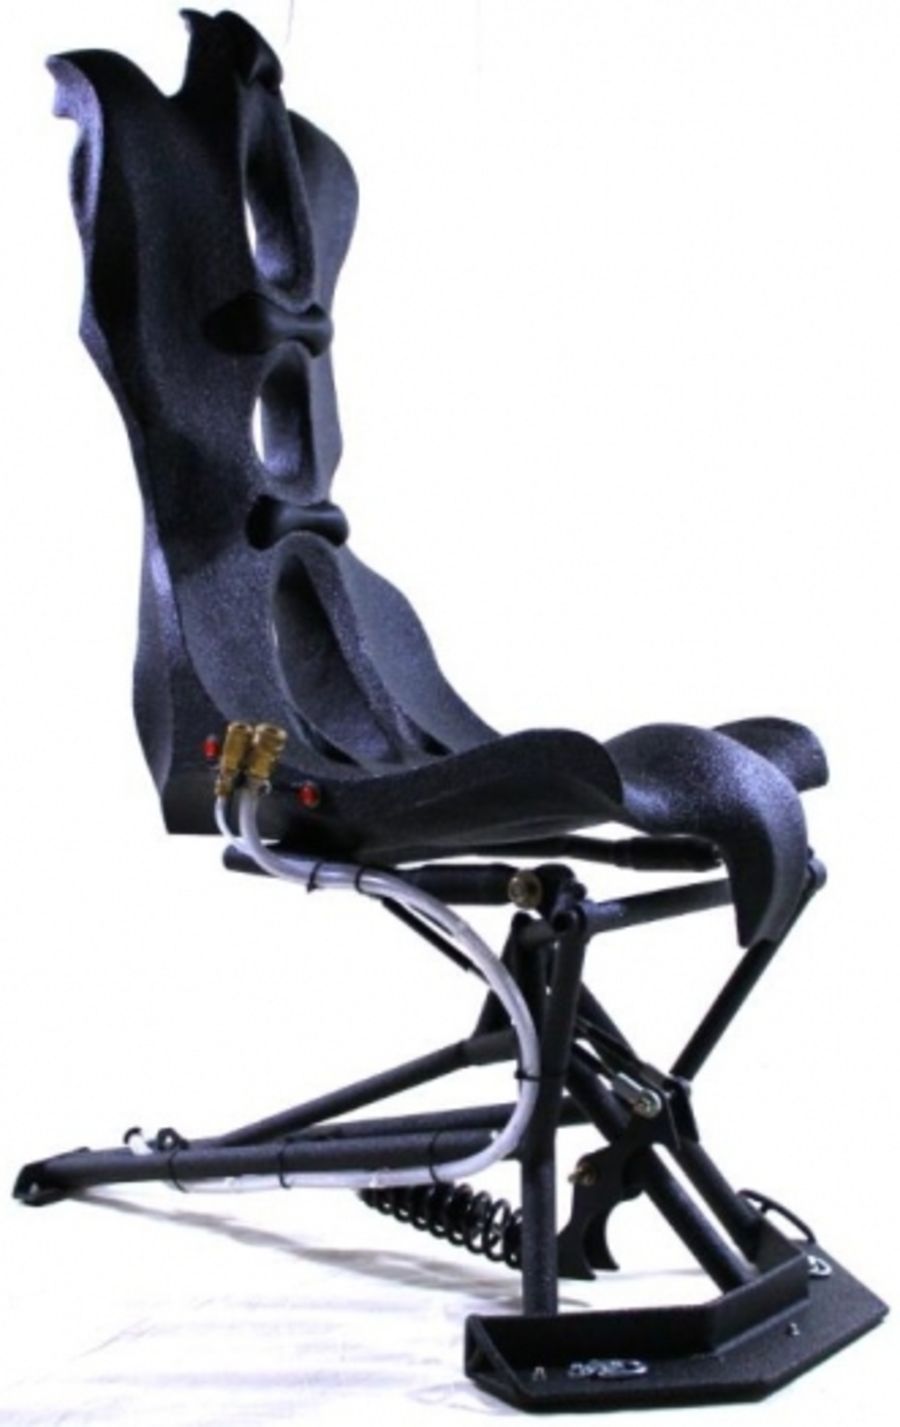 The Stig chair - as strange as it looks